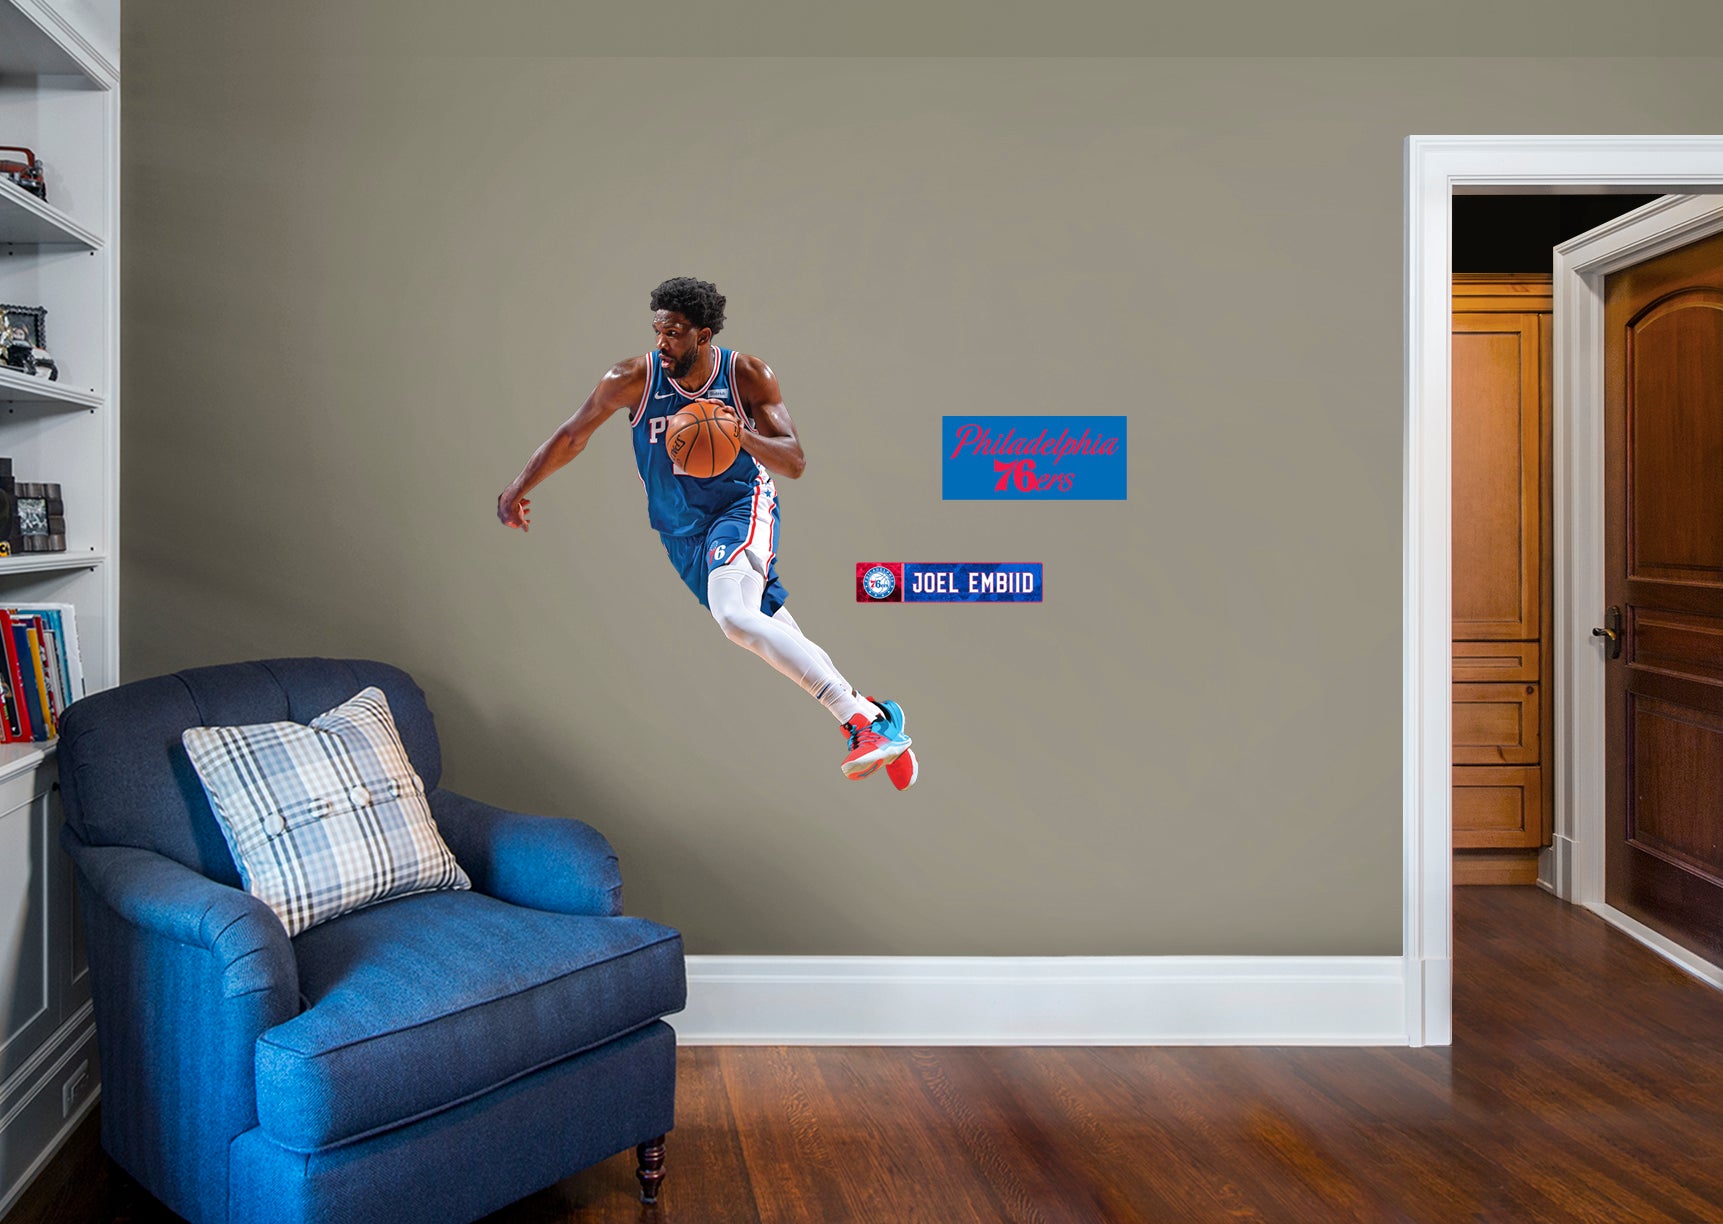 Joel Embiid 2021 for Philadelphia 76ers - Officially Licensed NBA Removable Wall Decal Giant Athlete + 2 Decals (39"W x47"H) by